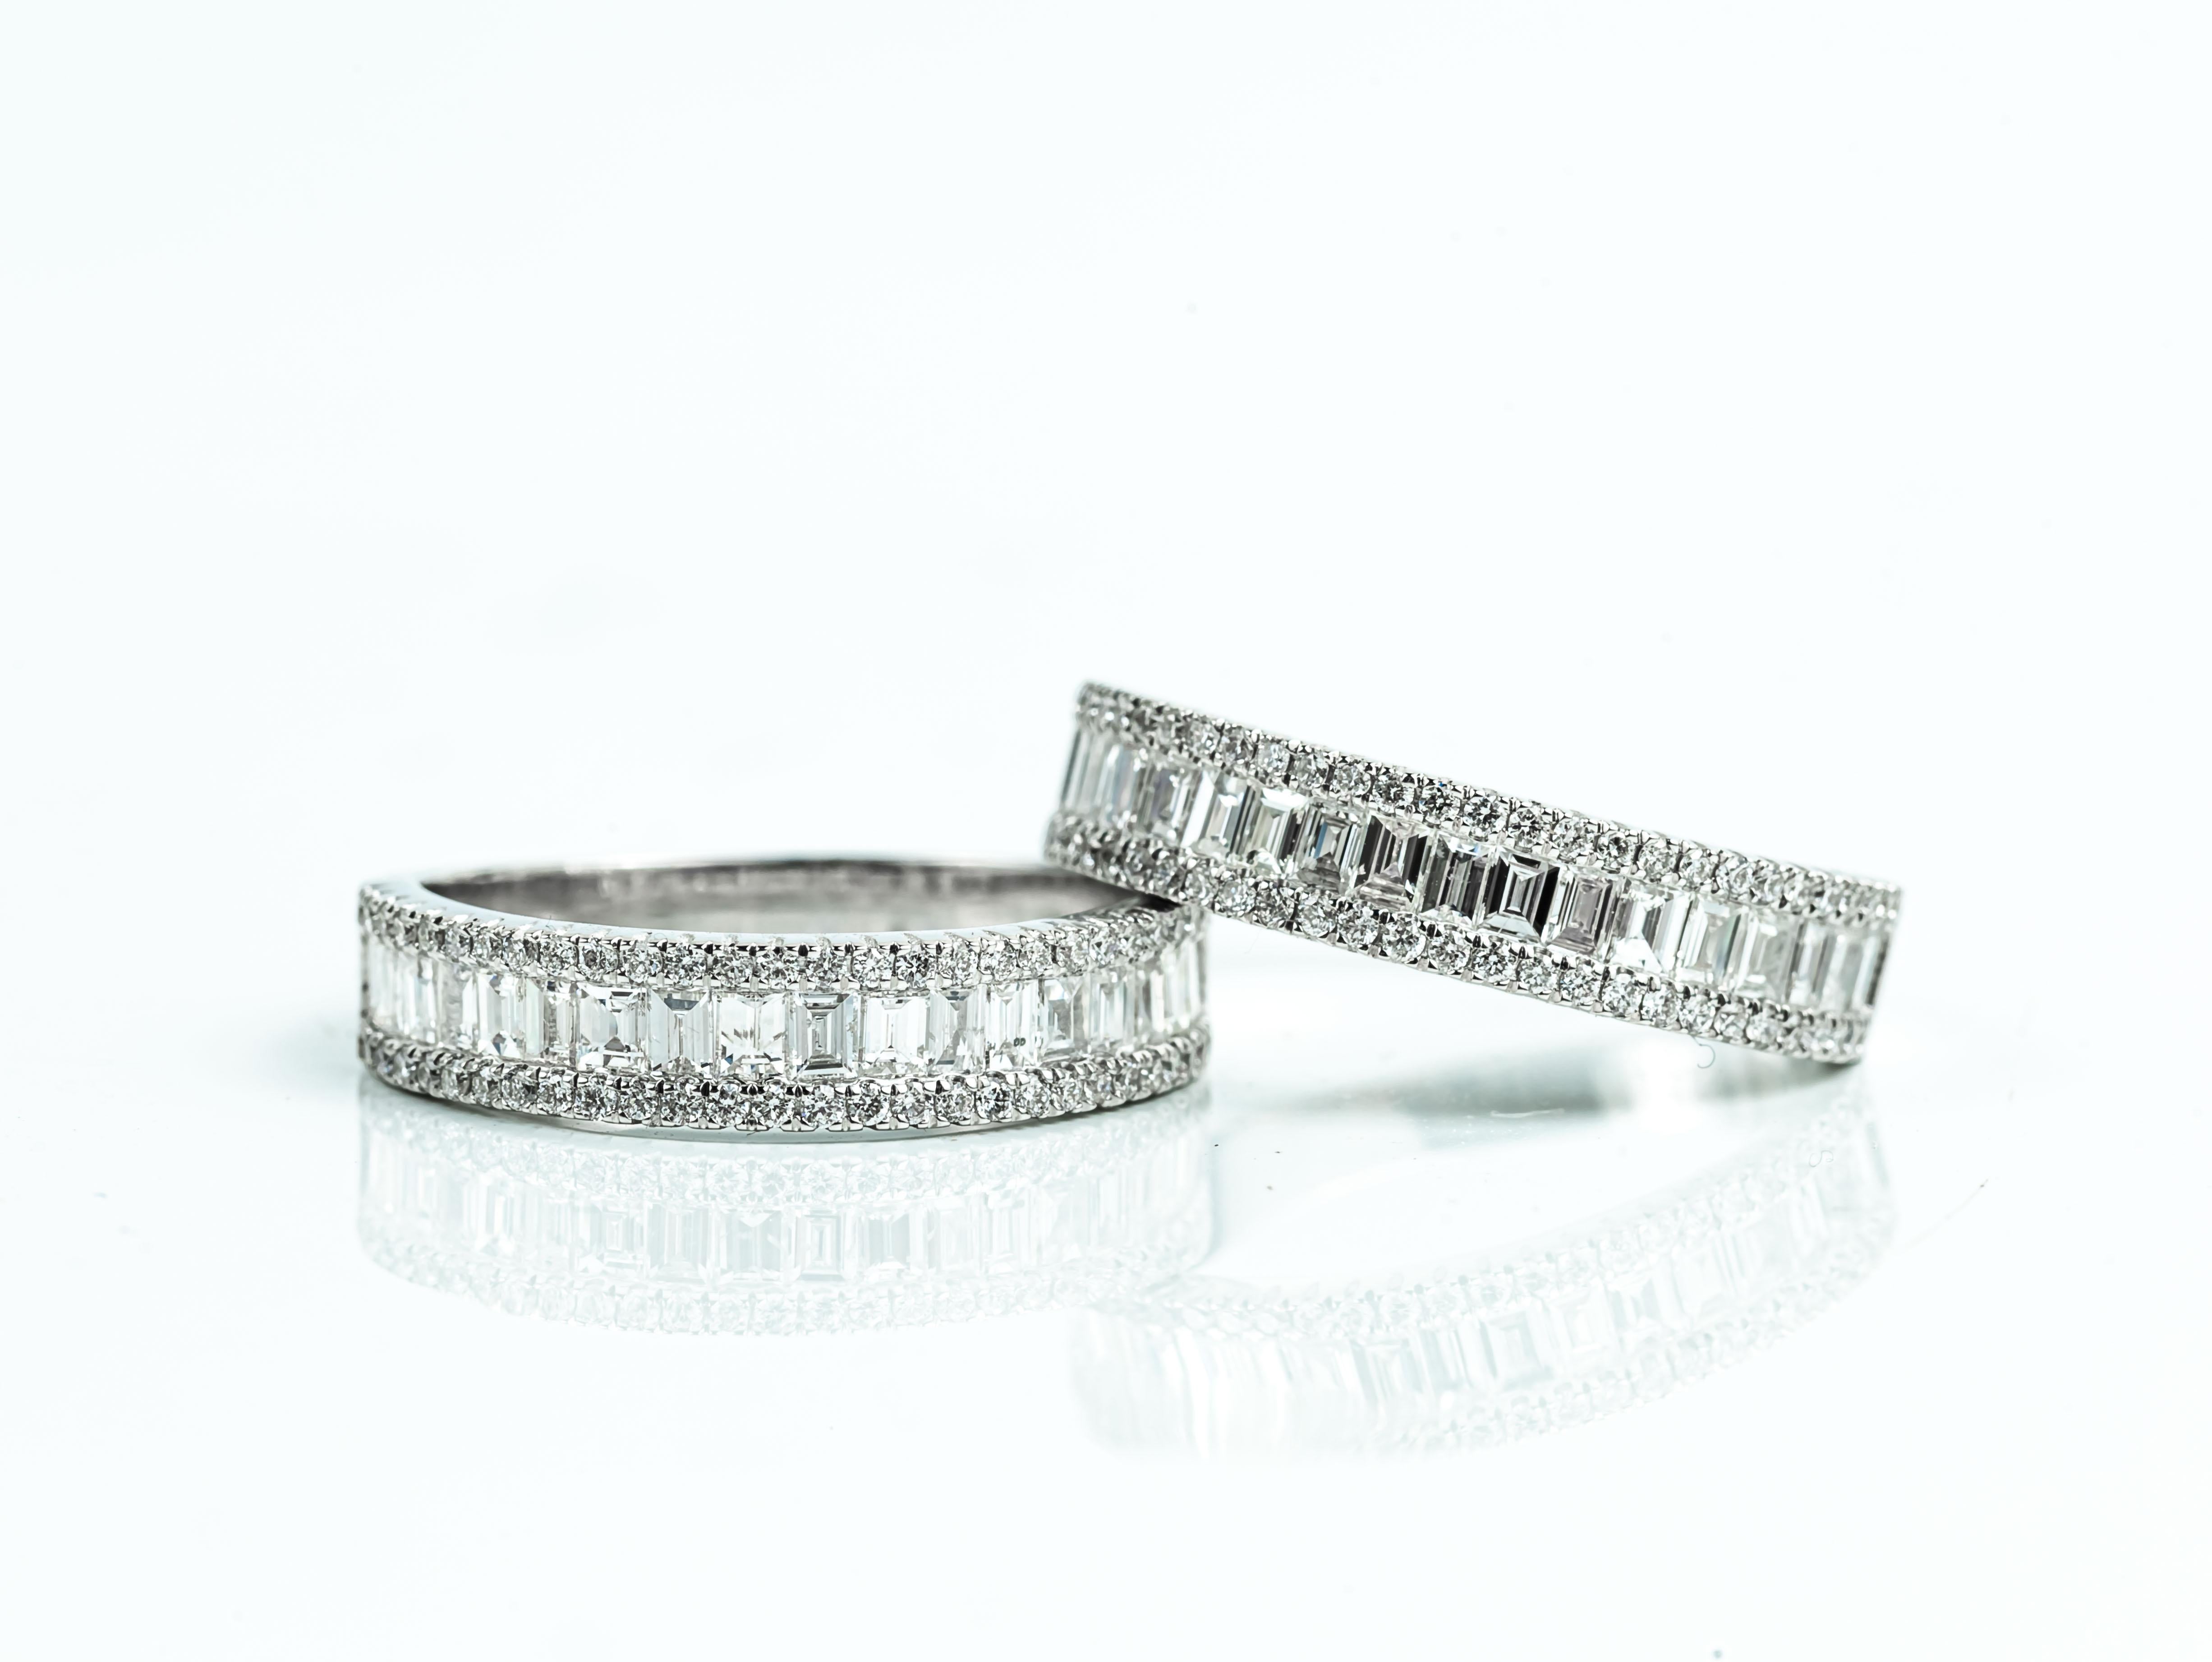 0.8 Carat Diamond Baguette Half Eternity Wedding Band in 18k White Gold In New Condition For Sale In Jaipur, RJ